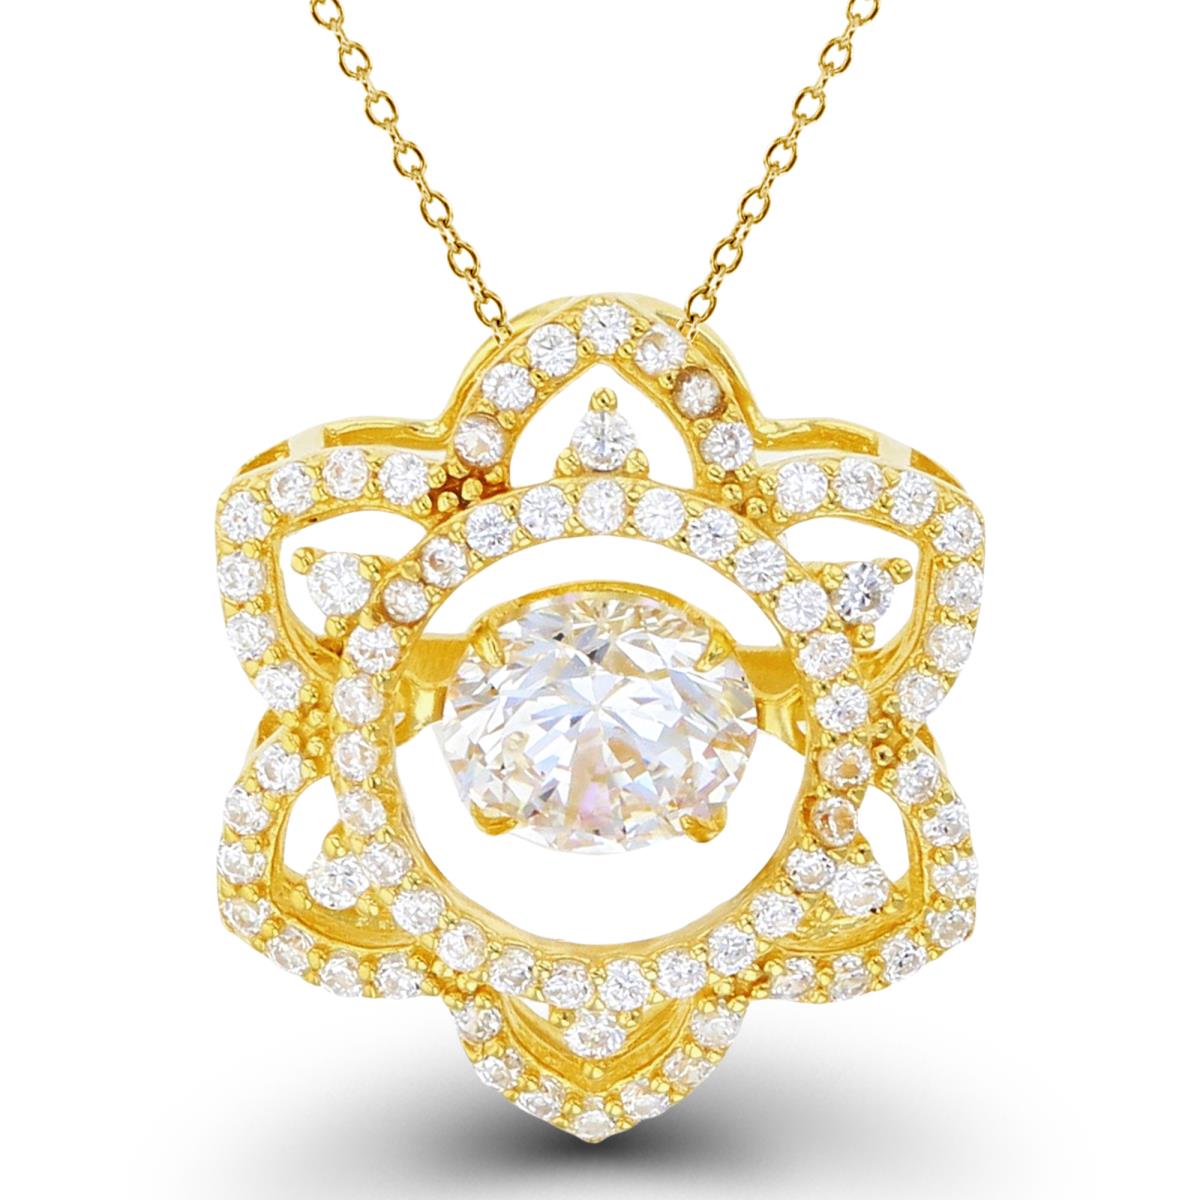 Sterling Silver+1Micron Yellow Gold 6mm Rnd White CZ Dancing in Flower 18"Necklace